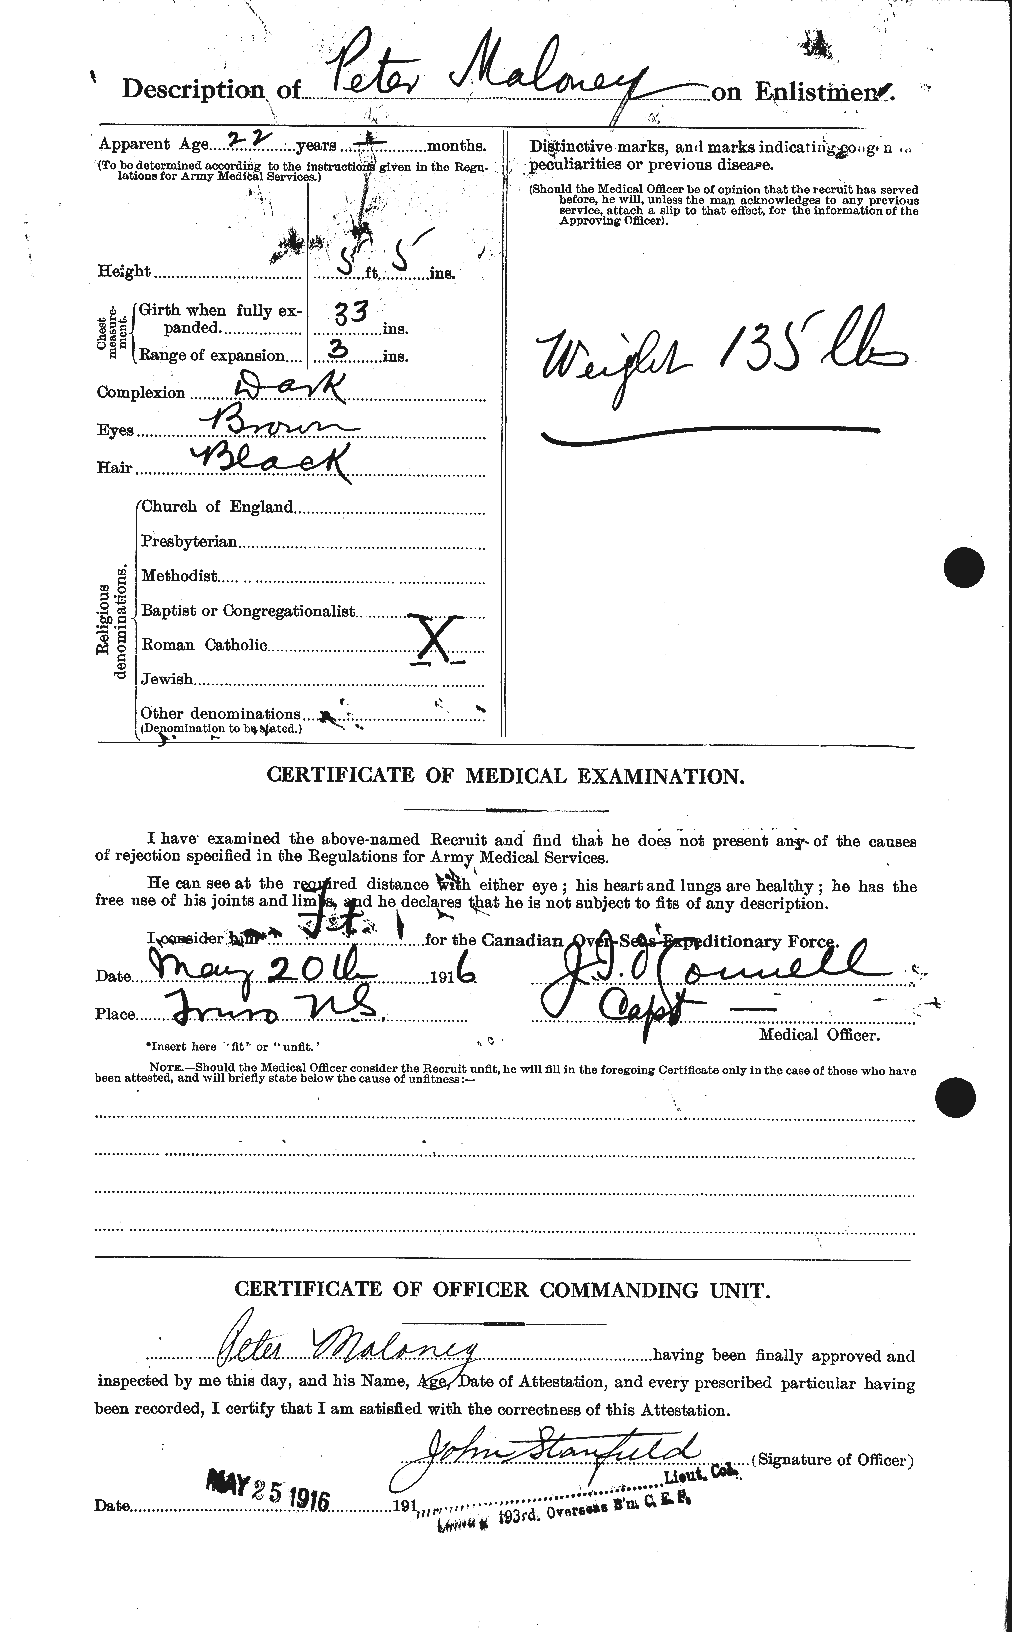 Personnel Records of the First World War - CEF 479022b